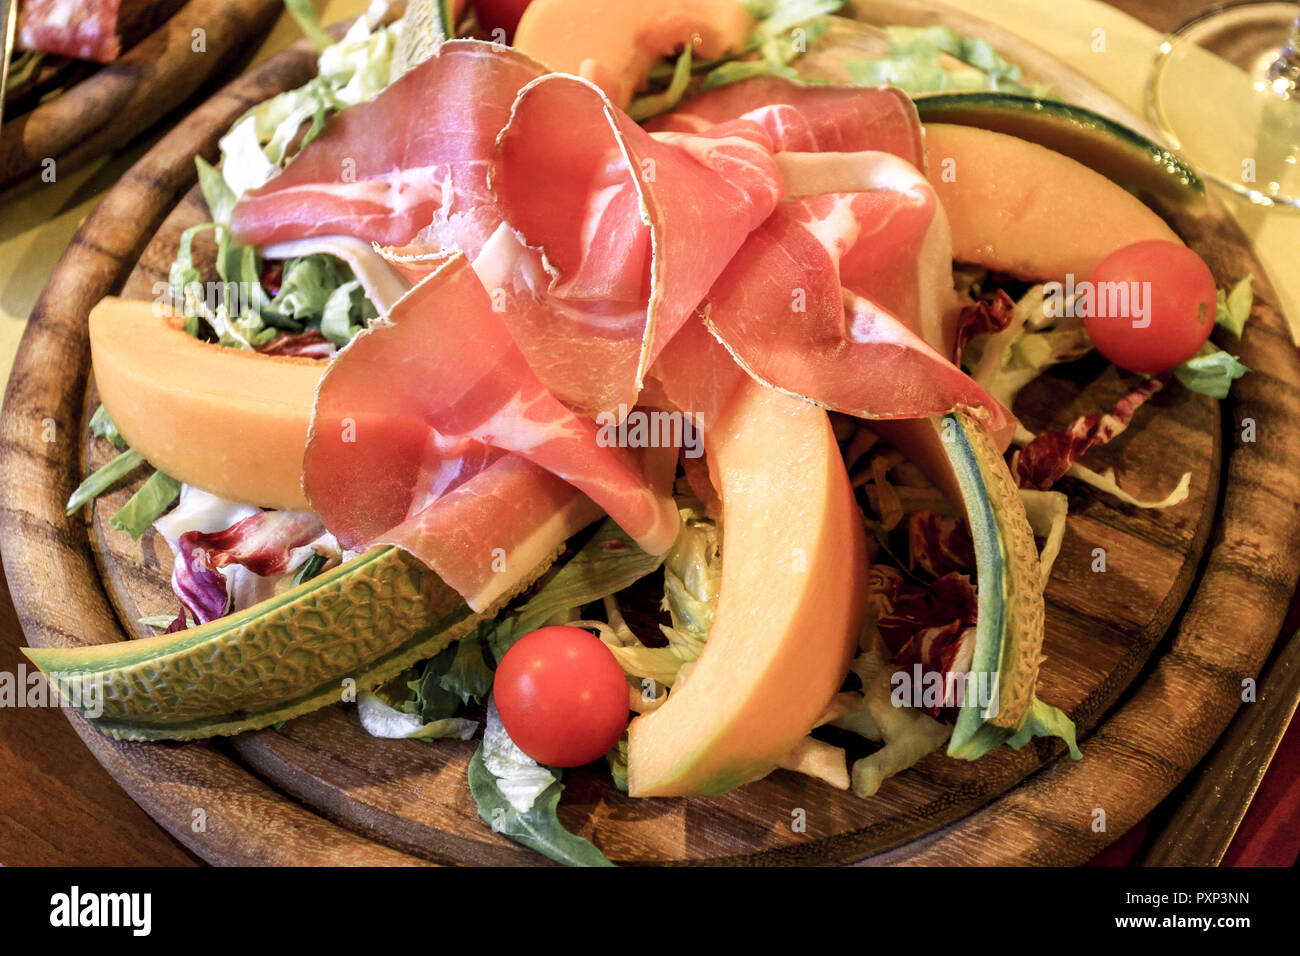 - specialities hi-res Ham and stock photography Alamy images